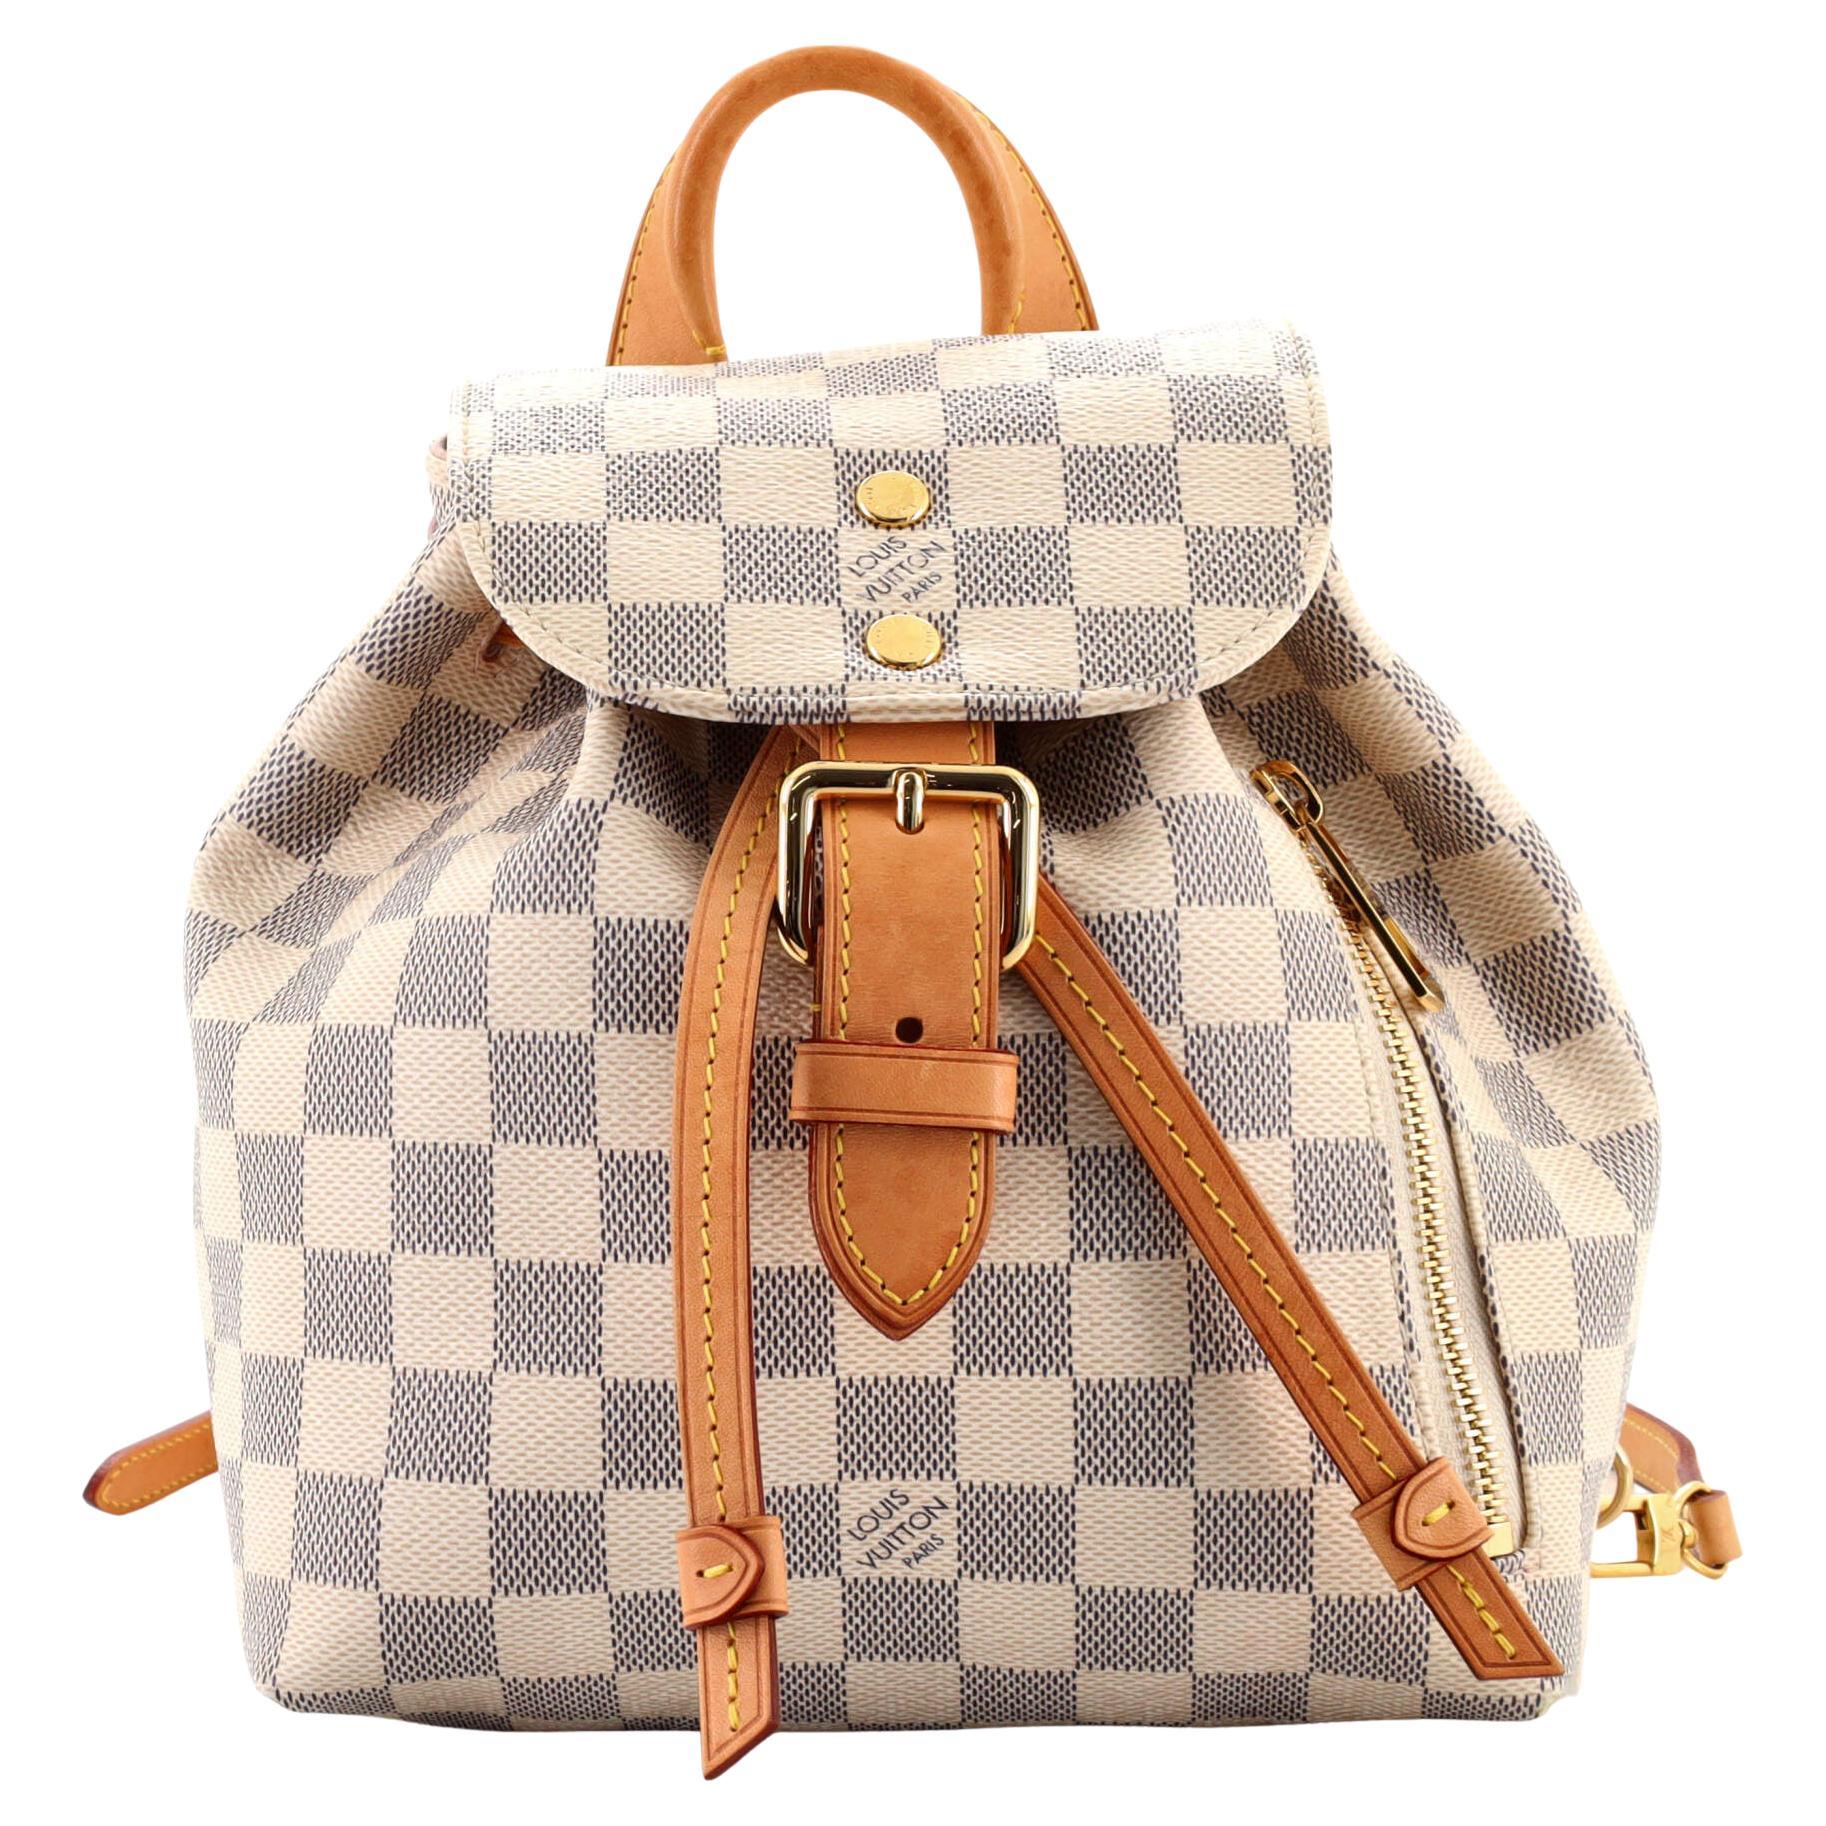 Sac A Dos Louis Vuitton - 11 For Sale on 1stDibs